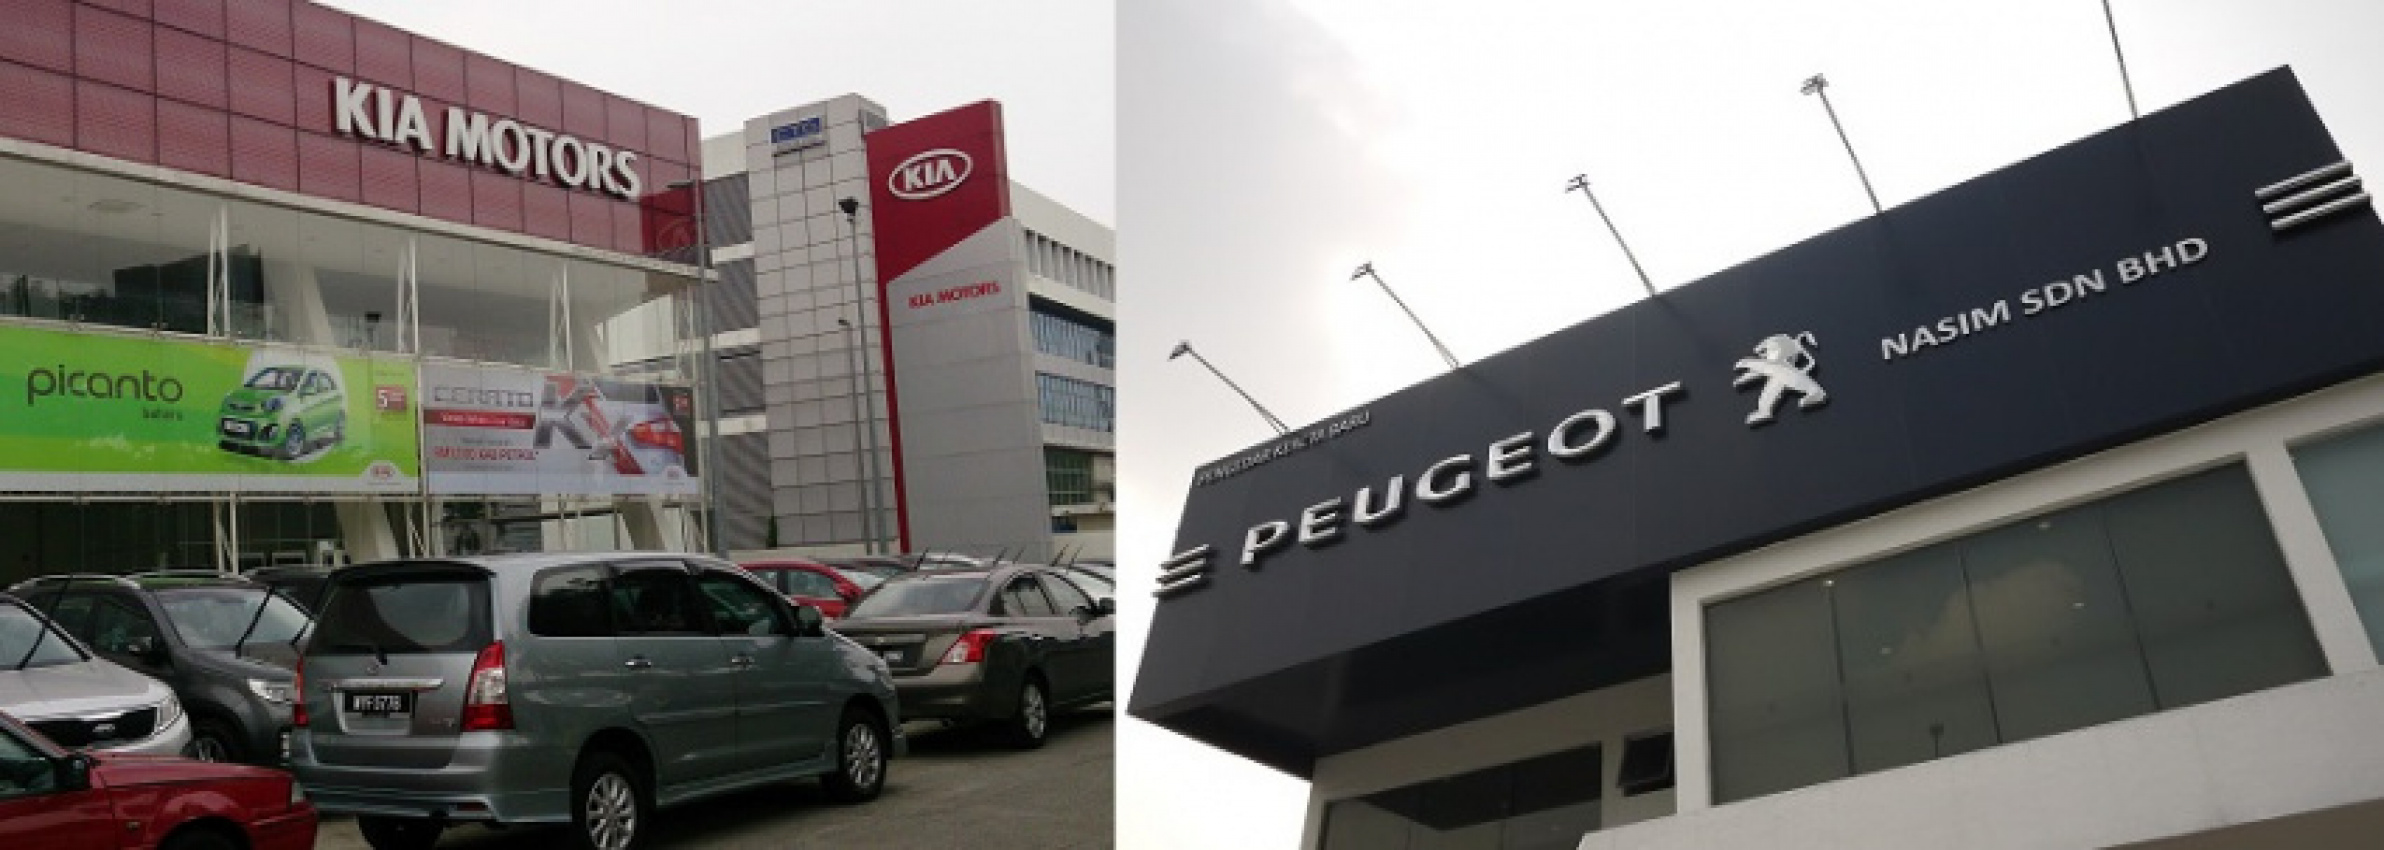 autos, cars, geo, kia, peugeot, strong rumours of bermaz auto taking over kia and peugeot brands before year ends